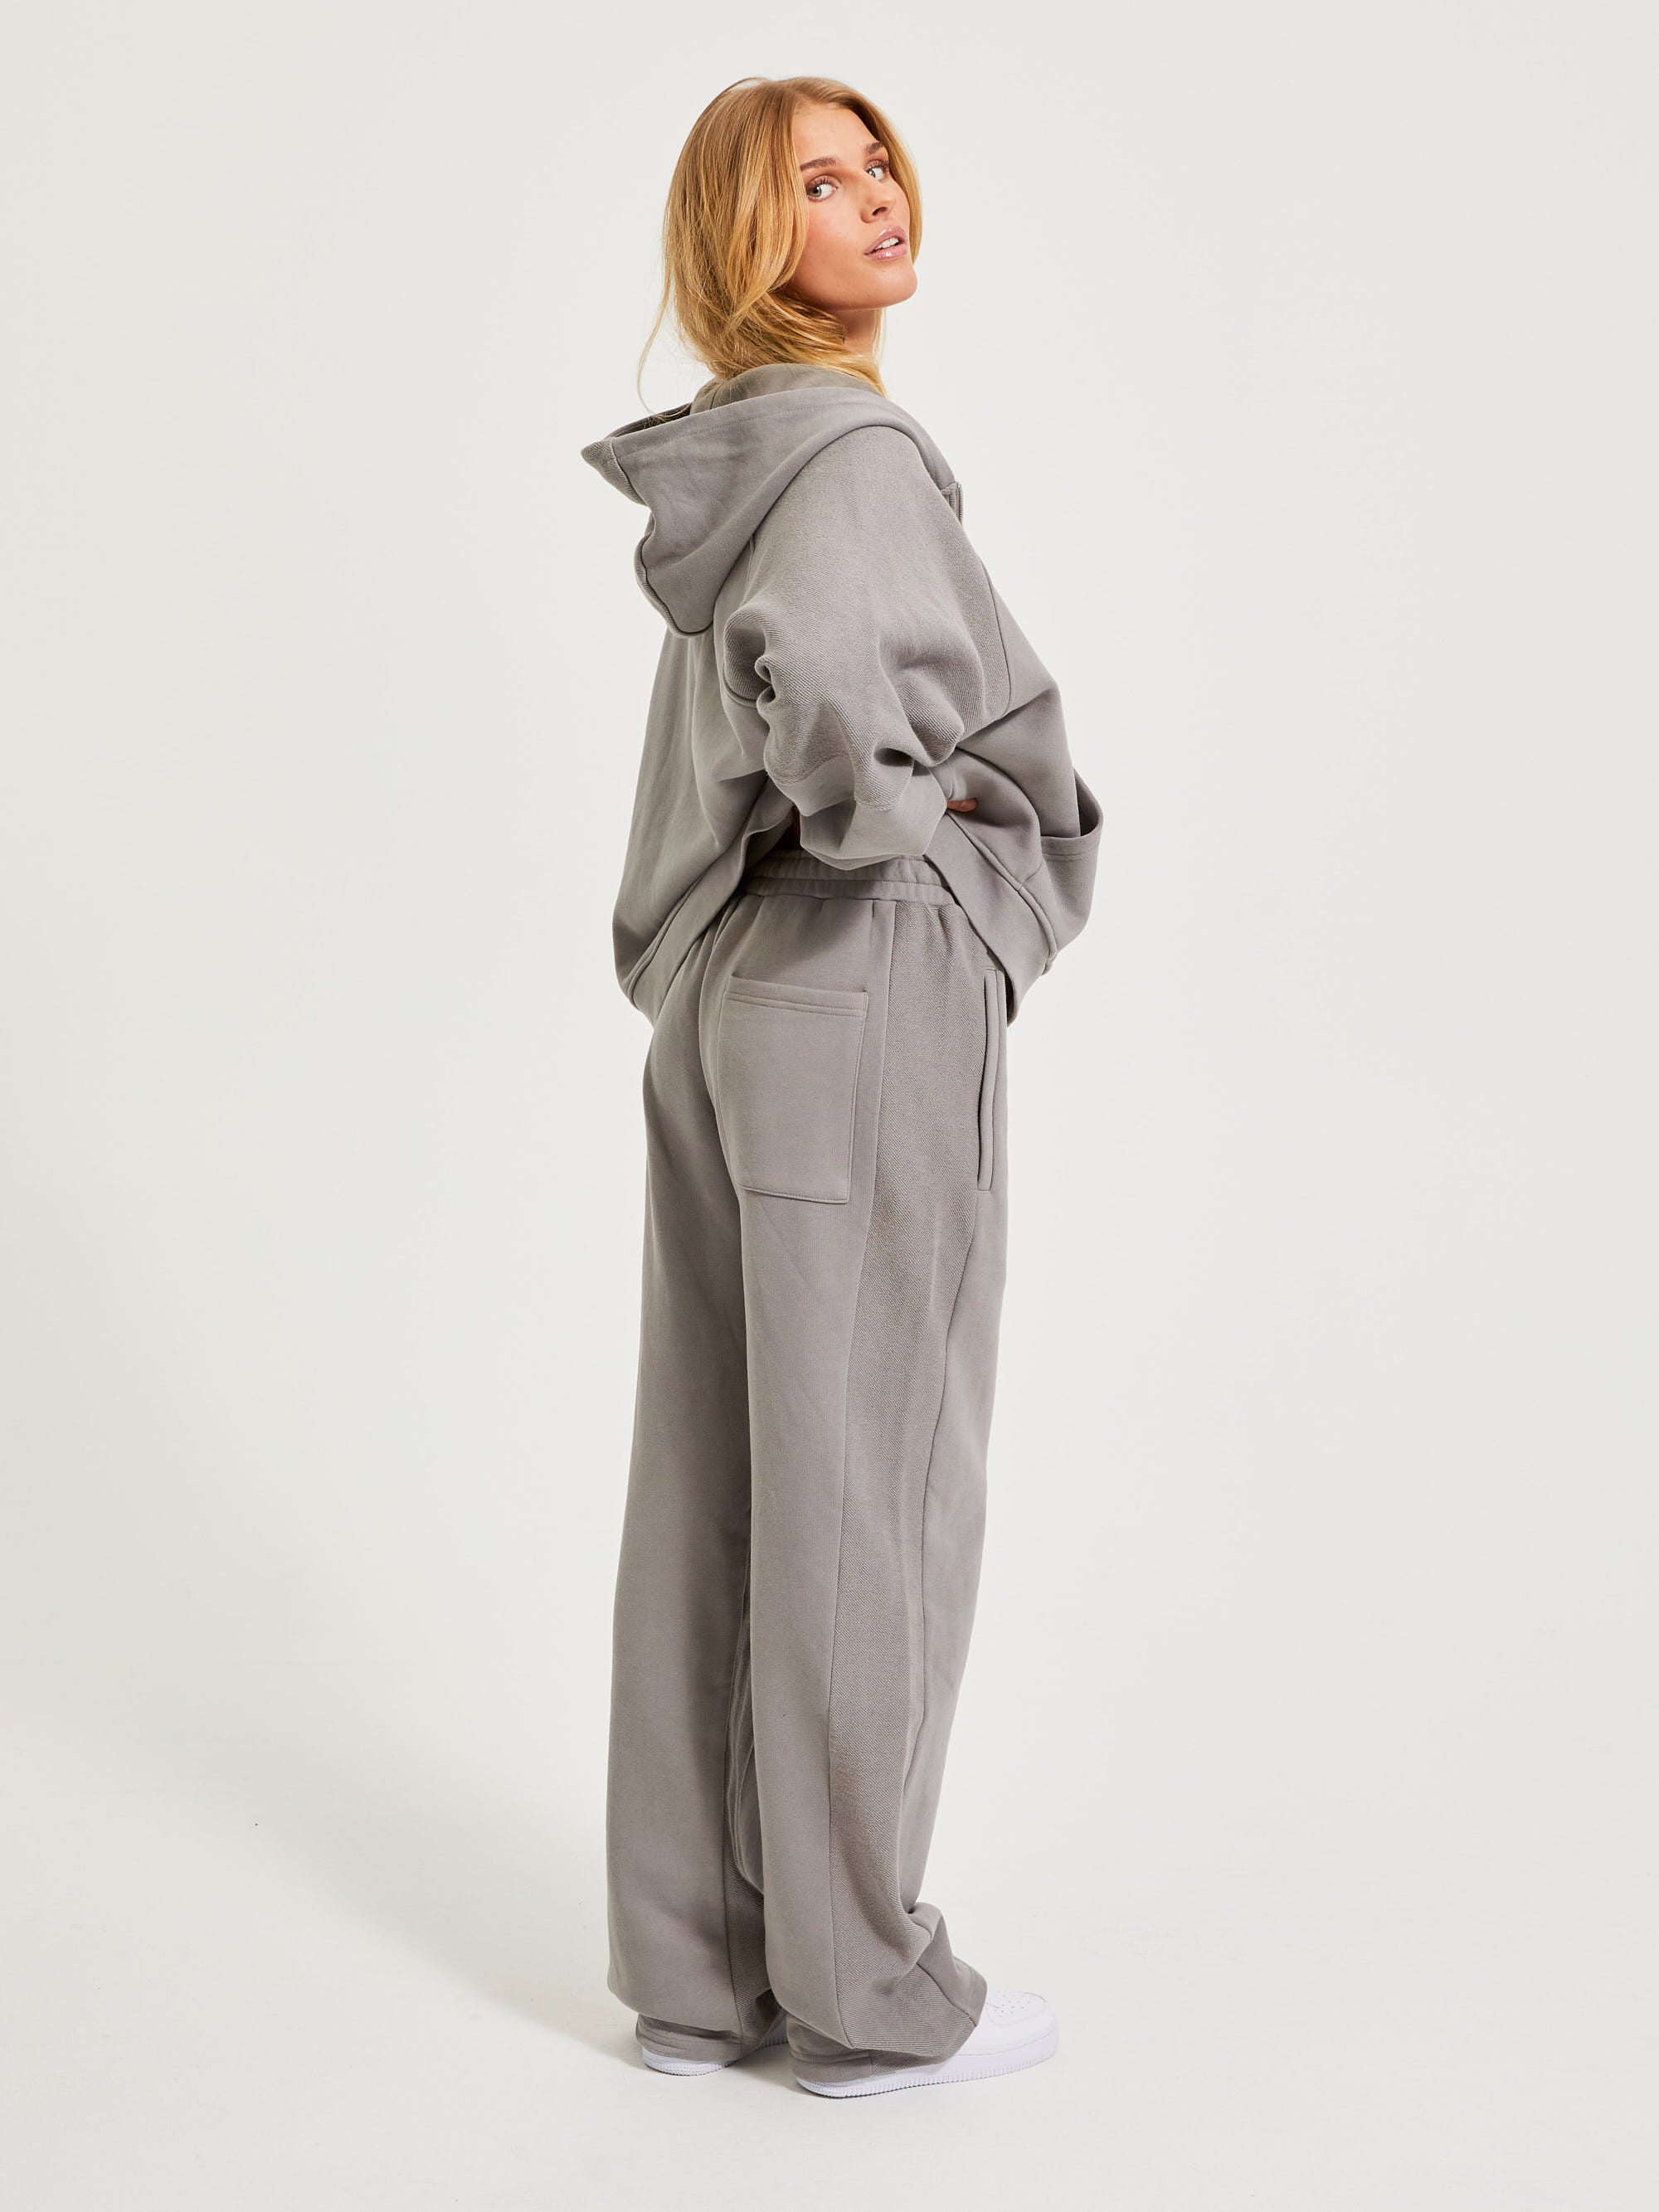 INSIDE OUT SWEATPANTS GREY - ATTODE